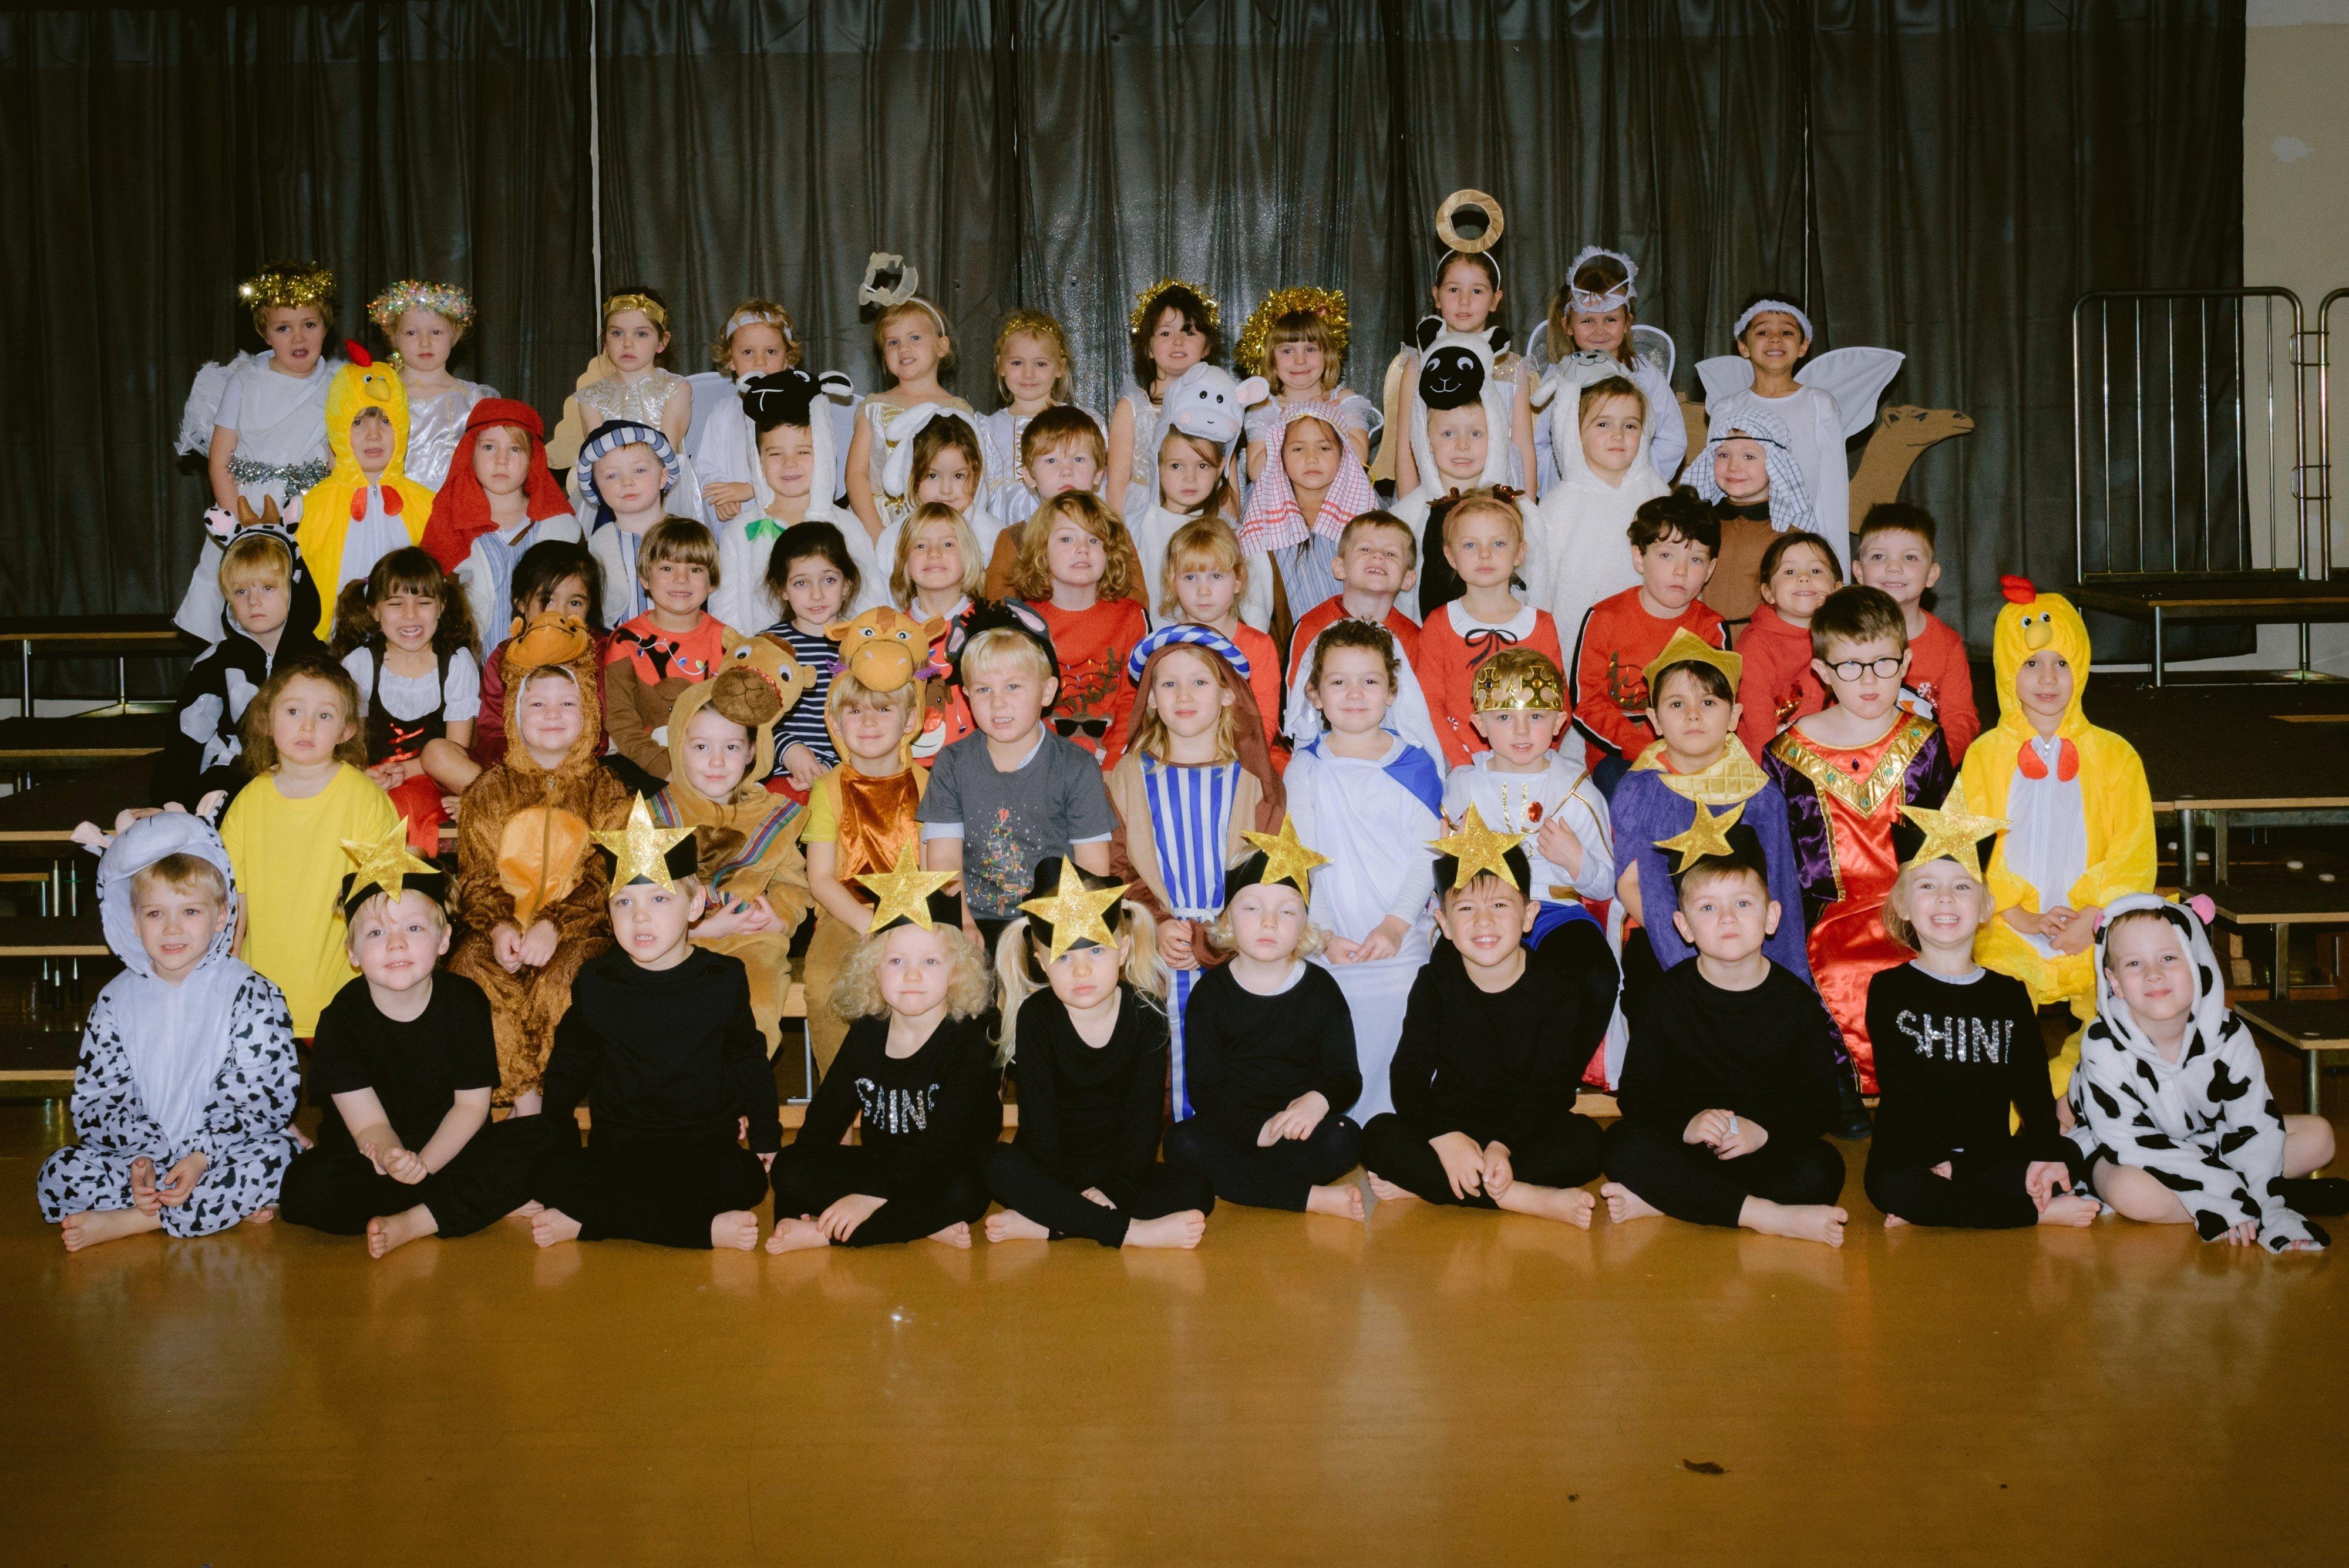 Steyning CE PRimary School - Reception children in their production 'A Little Nativity' SUS-191216-151802001